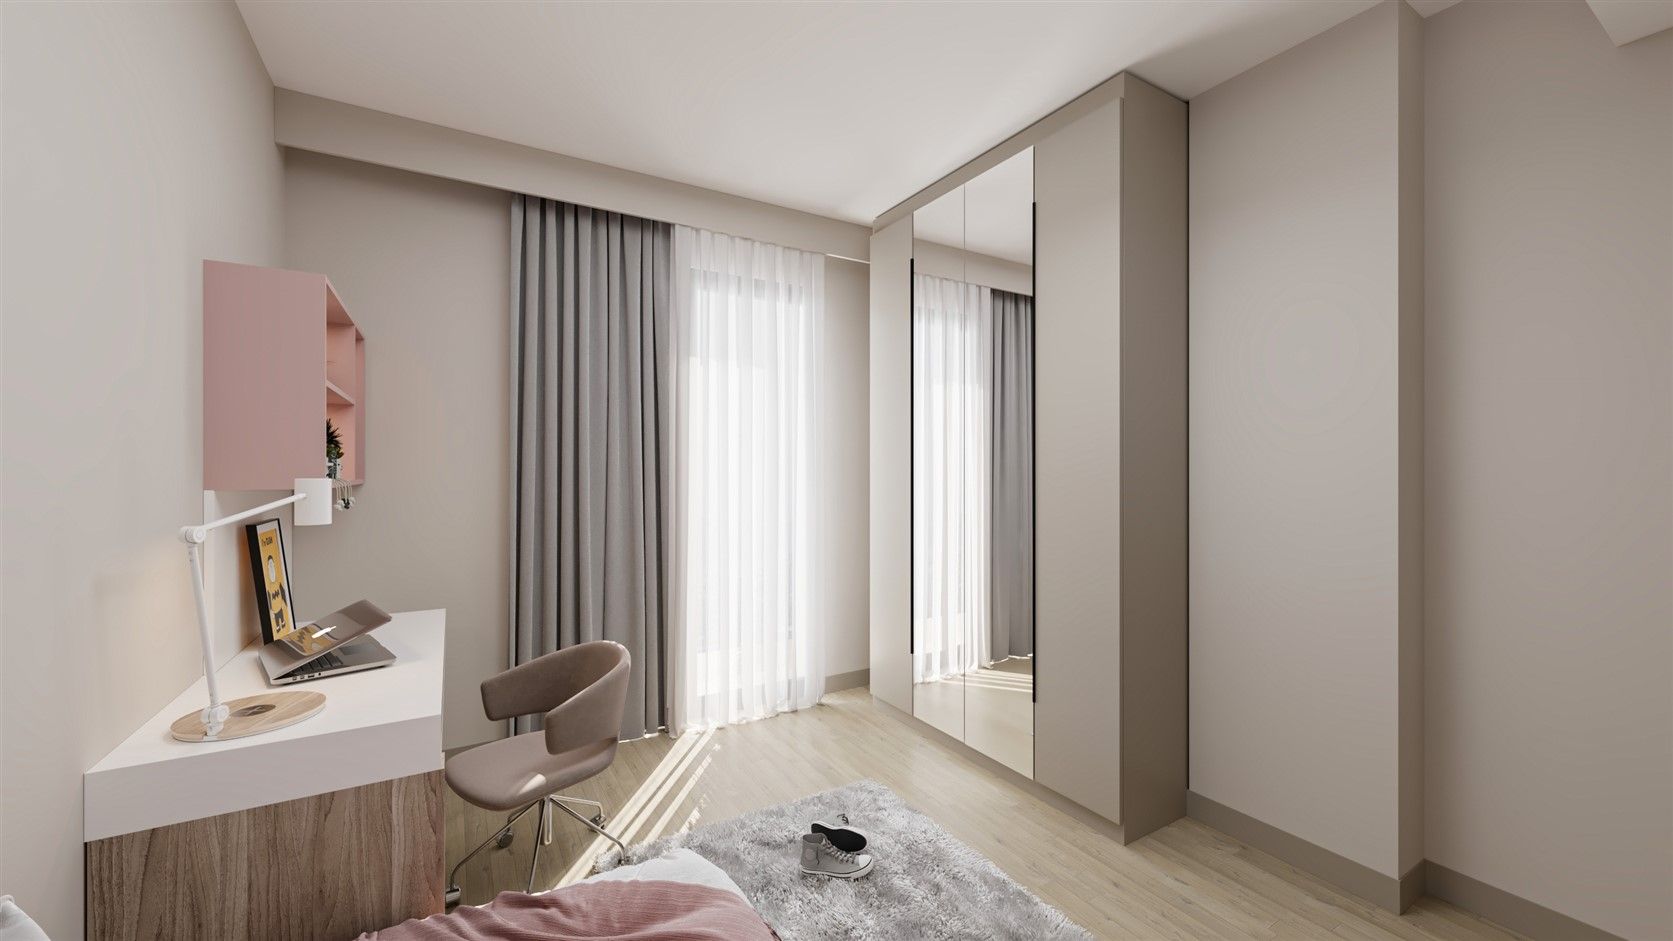 Residential project close to the central points of Istanbul